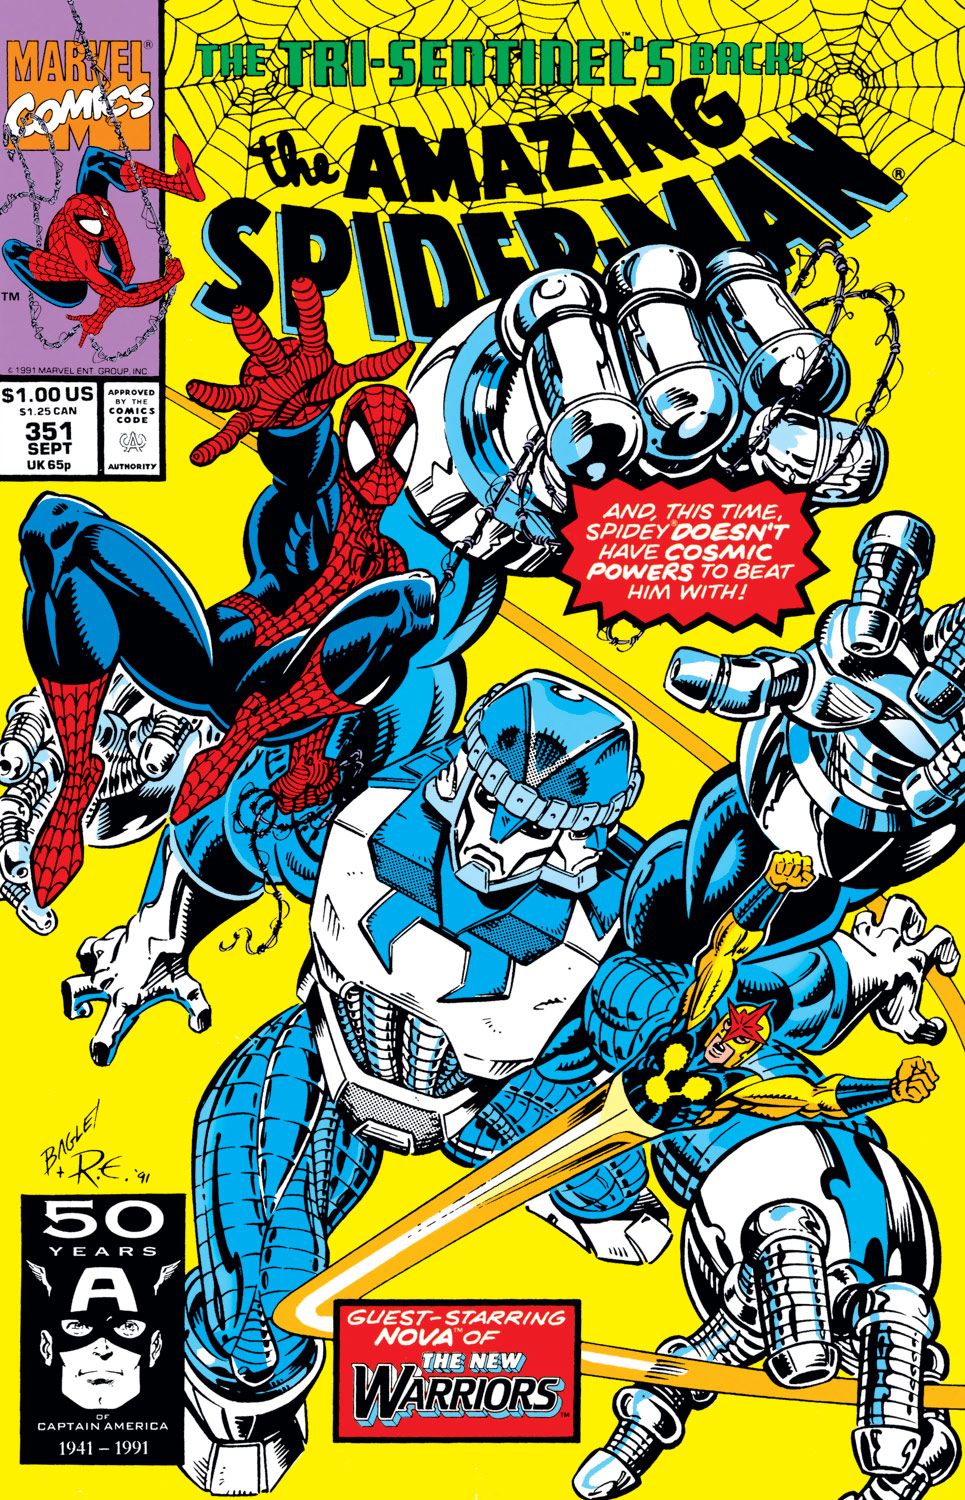 The Amazing Spider-Man (1963) #351 | Comic Issues | Marvel